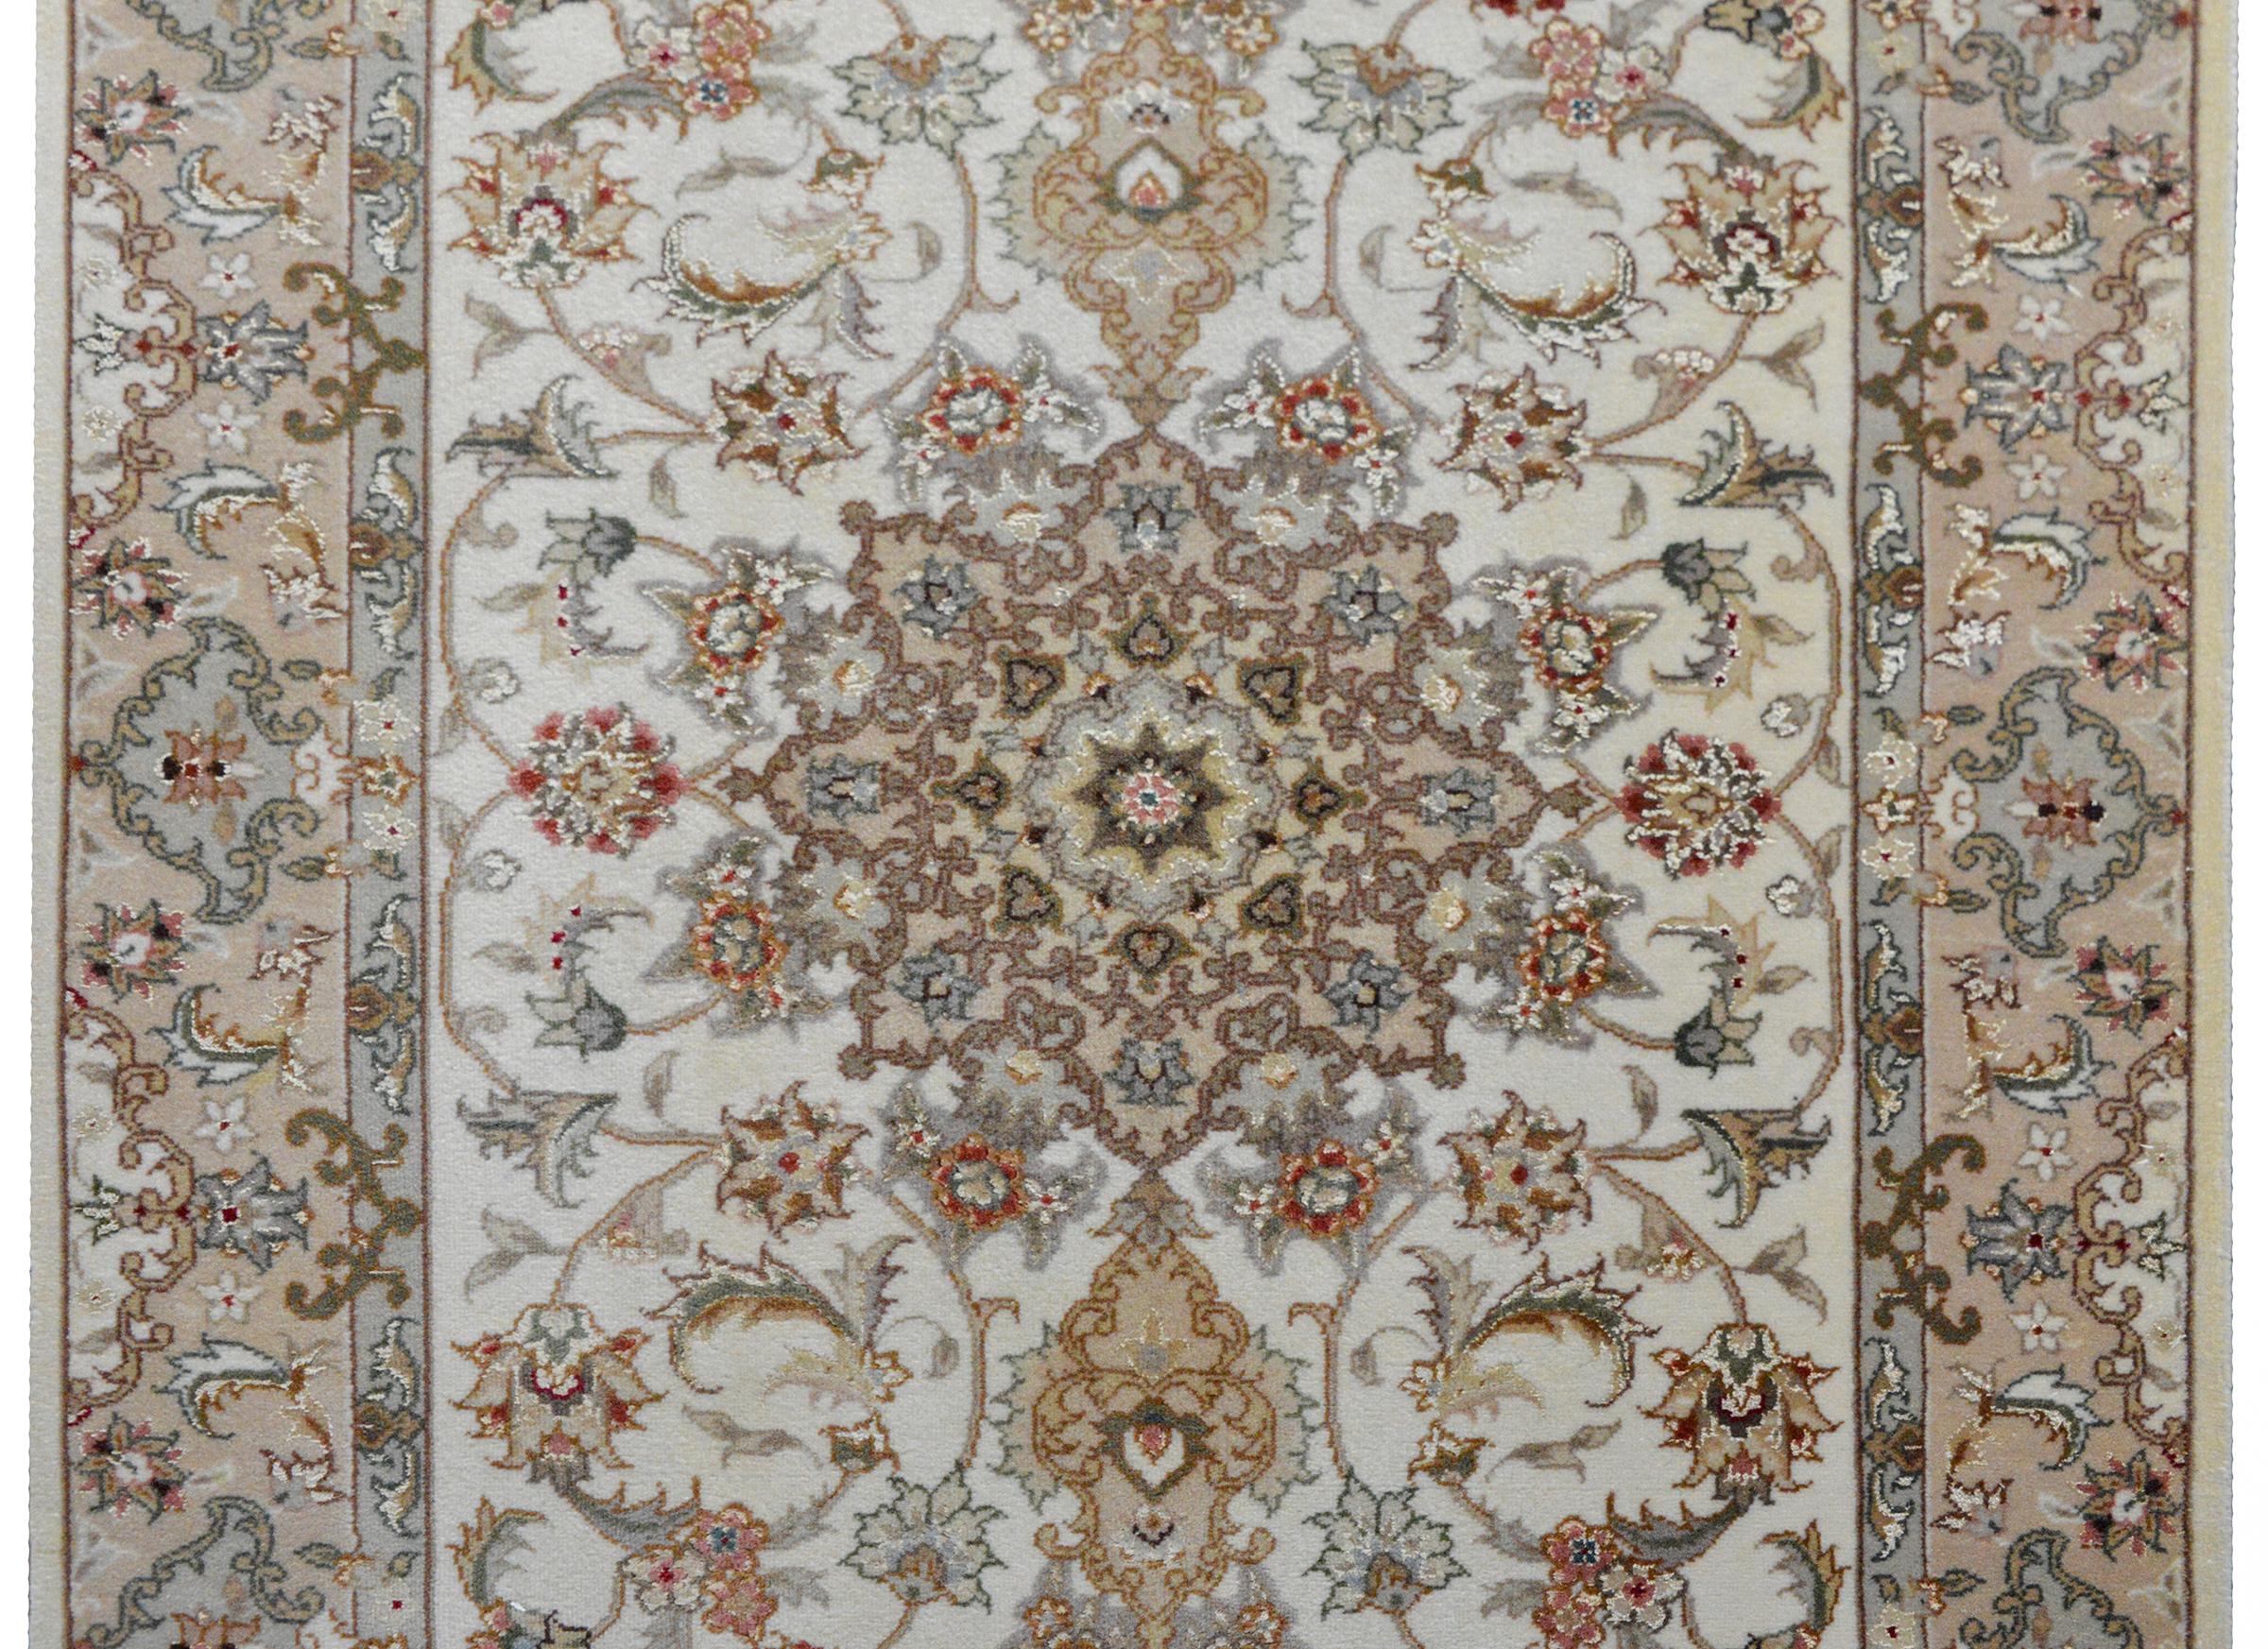 A striking vintage Paksitani hand-knotted Tabriz-style runner woven with a trellis floral pattern in muted reds, greens, golds, and browns, and set against a cream colored background. The border is similar patterned and woven in similar colors s the